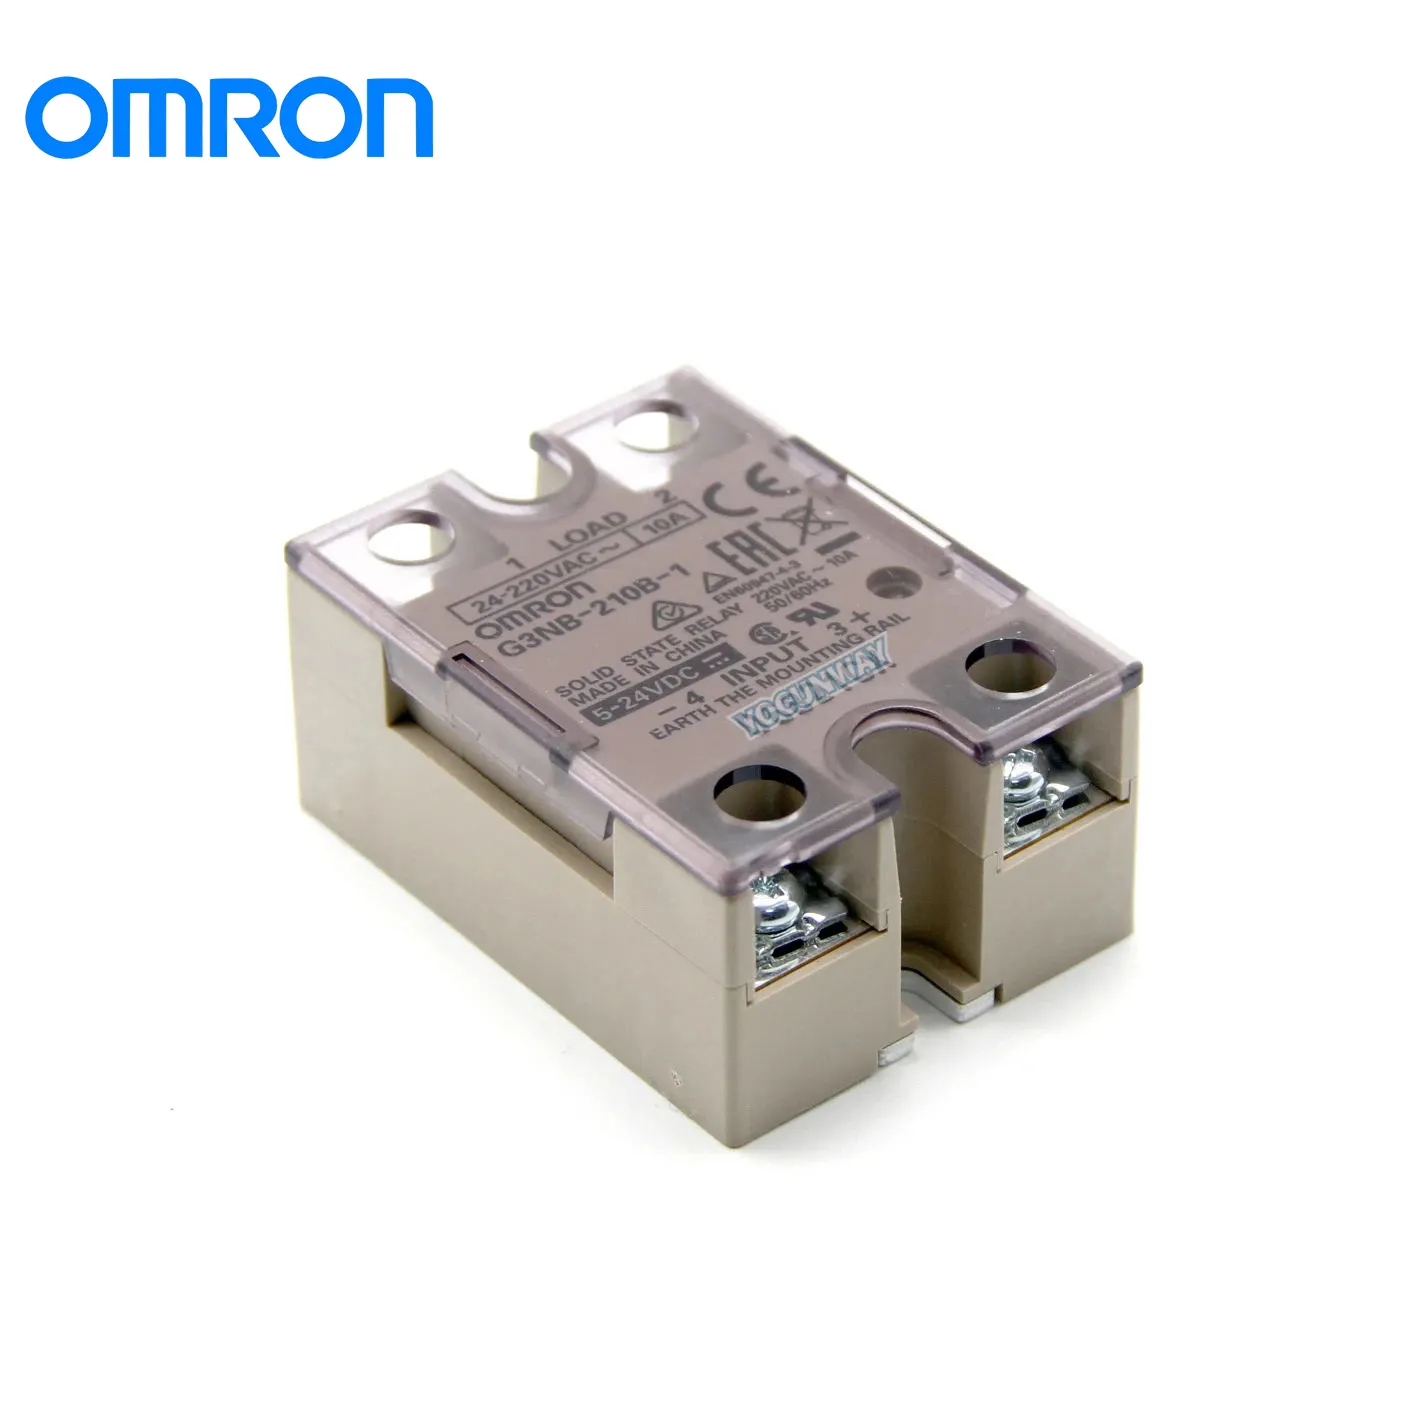 Authentique Original OMRON Solid State Relay G3NB-205B-1 G3NB-210B-1 G3NB-220B-1 G3NB-225B-1 G3NB-240B-1 G3NB-275B-1 G3NB-290B-1